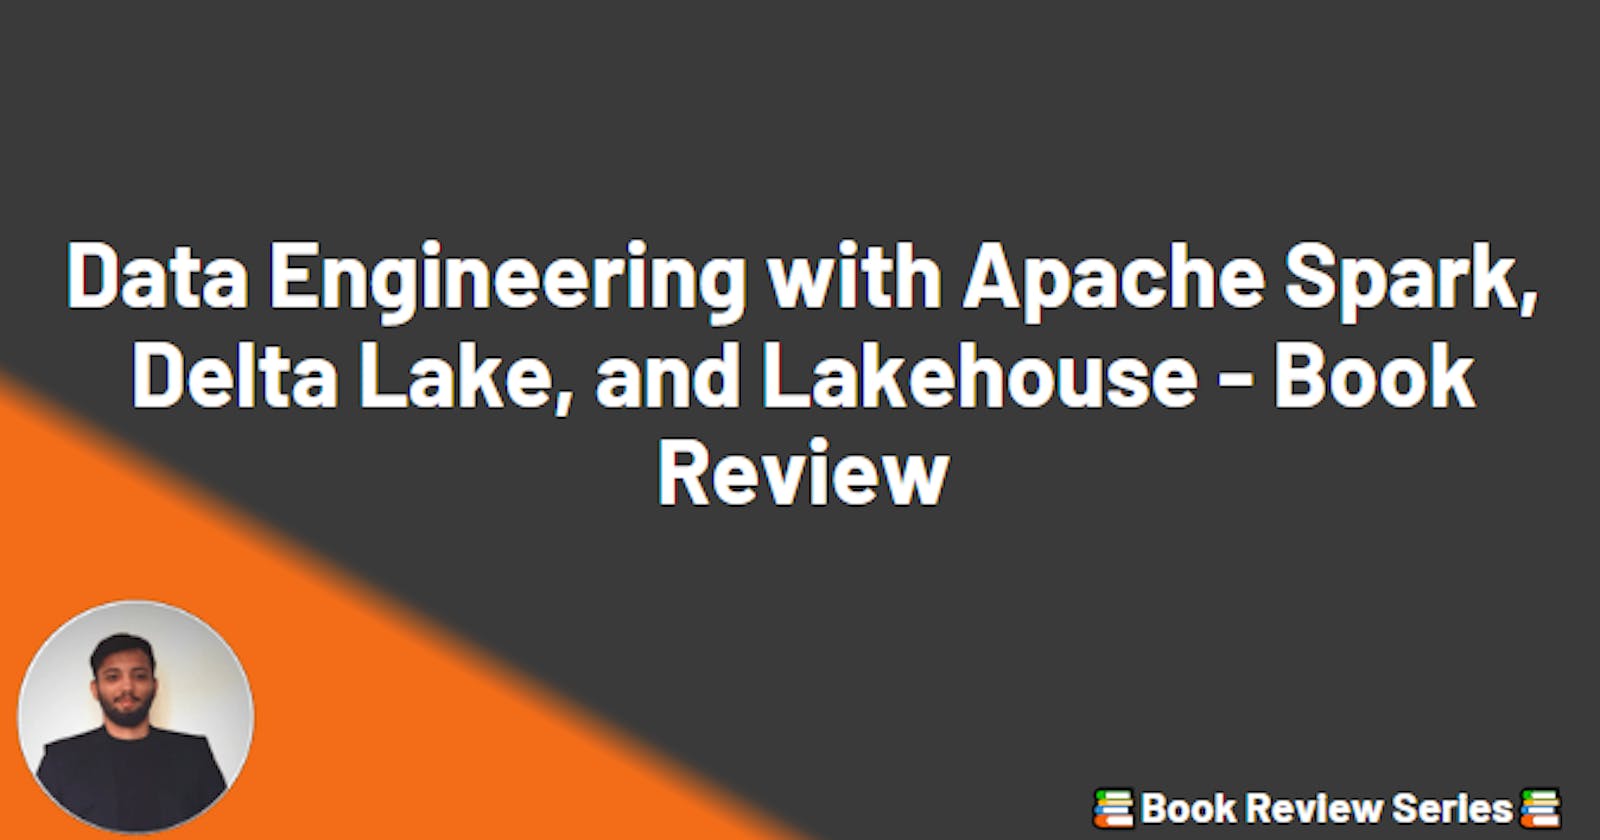 Data Engineering with Apache Spark, Delta Lake, and Lakehouse - Book Review